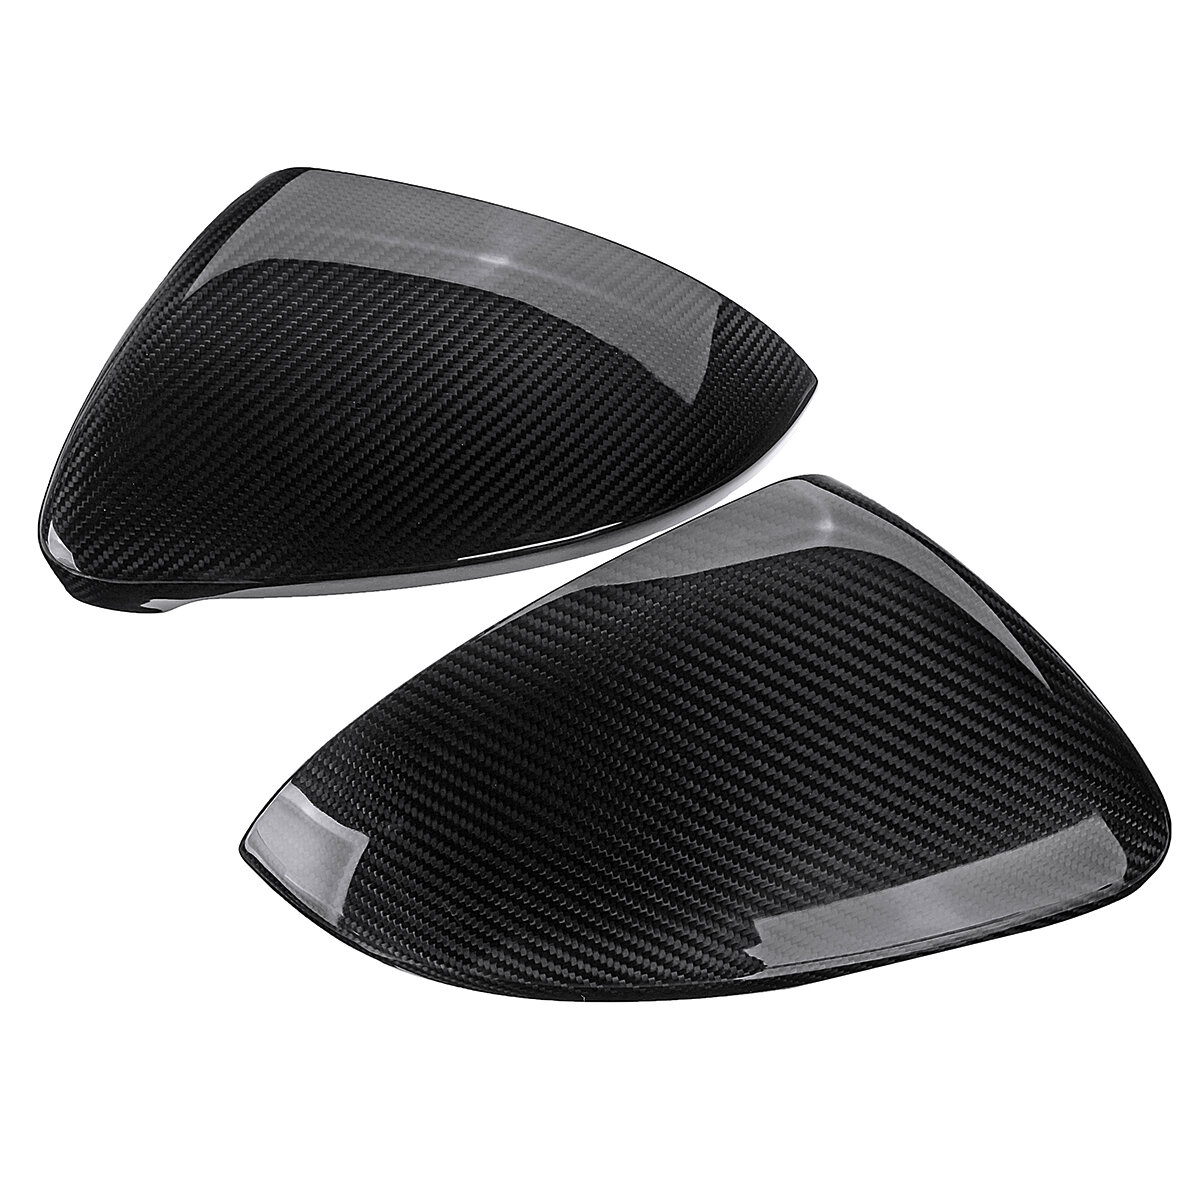 FOR 2013-18 LEXUS GS350 GS450H GSF ADD-ON CARBON FIBER SIDE MIRROR COVER CAPS